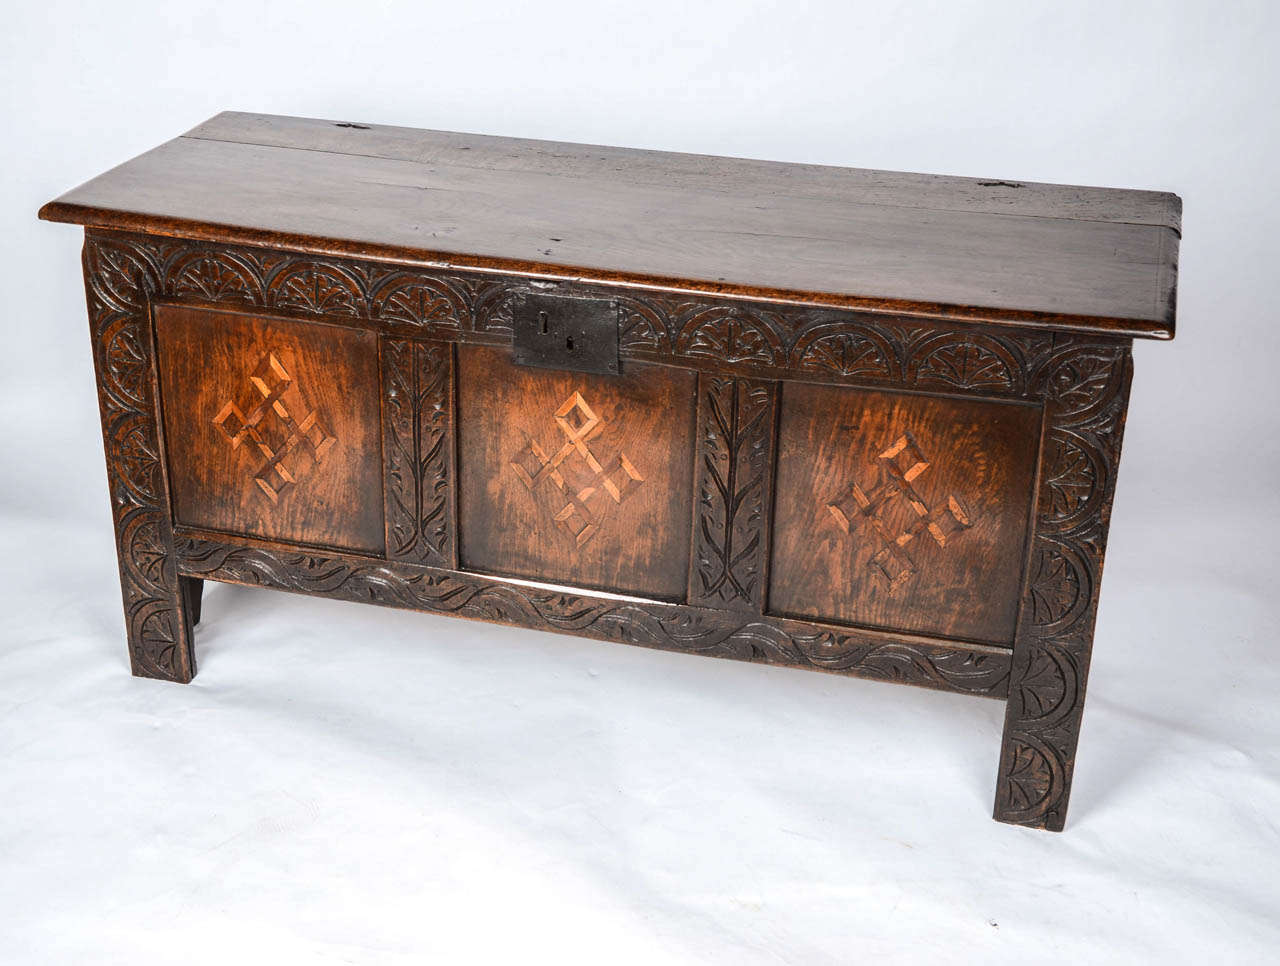 This is a good example of a Boarded OAK Chest or COFFER from the mid 17th Century or earlier,  with three superb front panels having Parquetry inlay of Holly and fruitwood. The inlay has a formal geometric pattern in the form of a celtic interface (